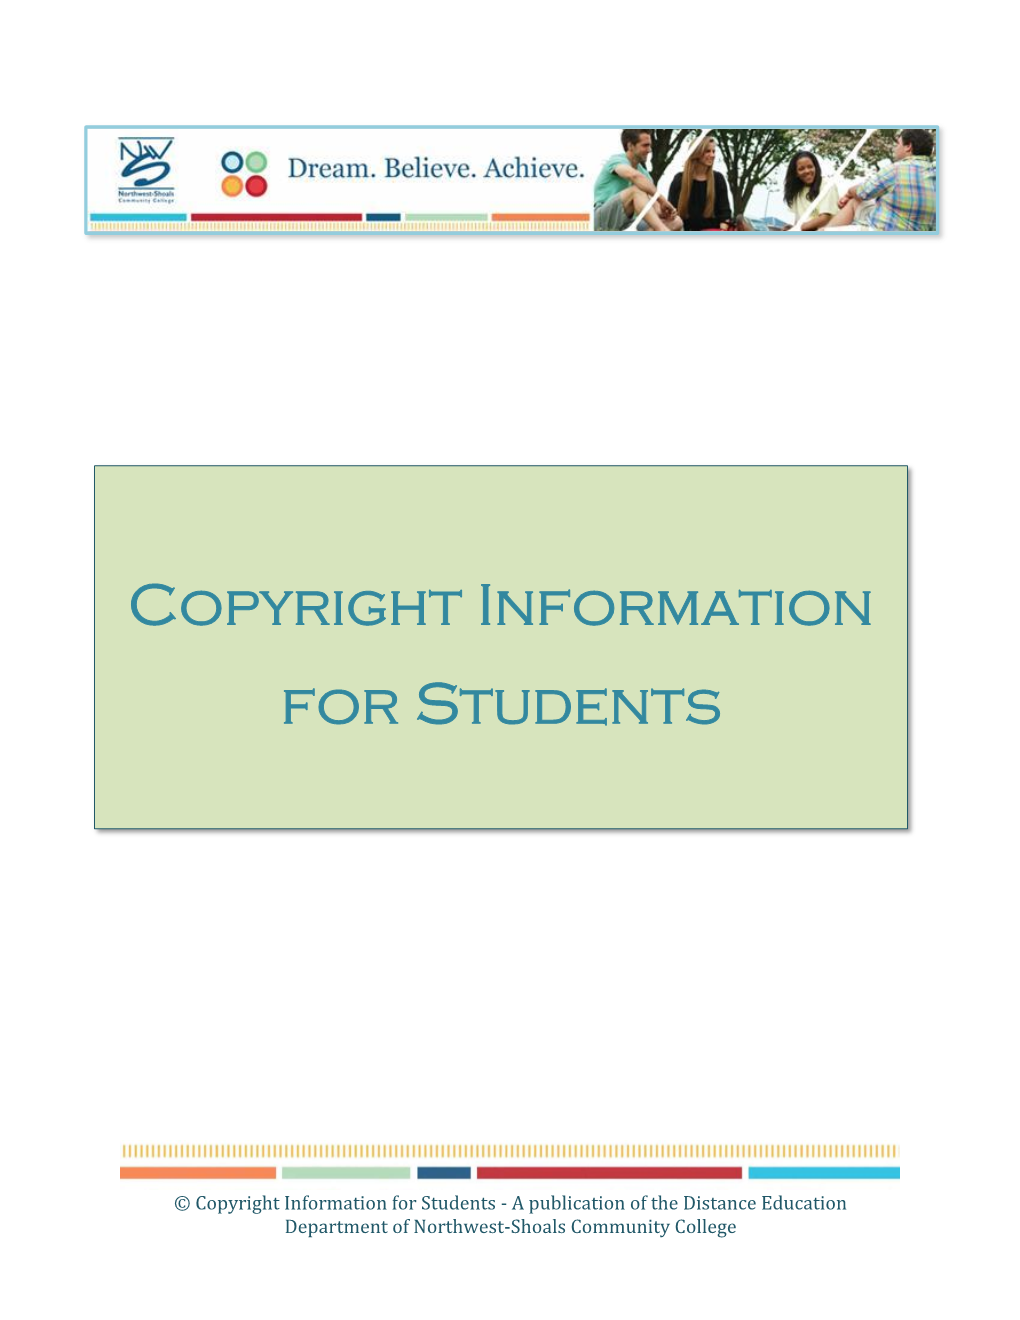 Copyright Information for Students